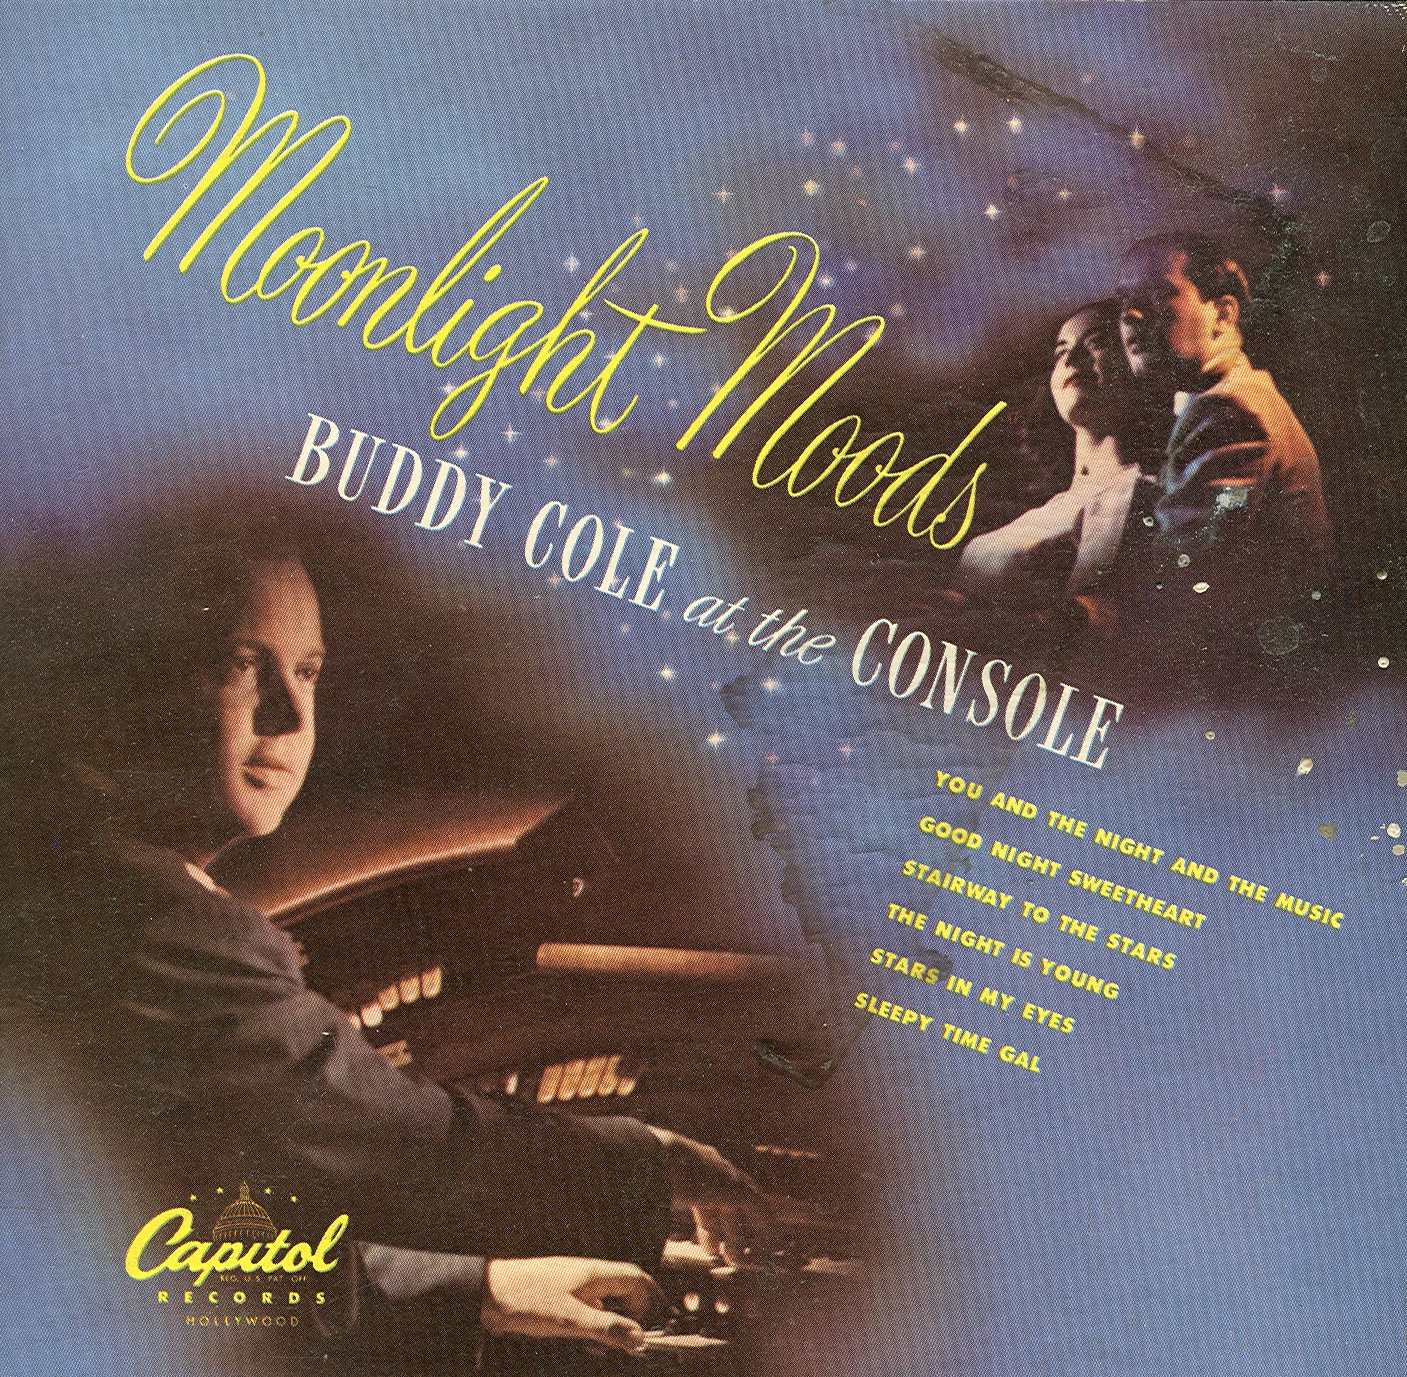 Moonlight Moods - Buddy Cole at the Console